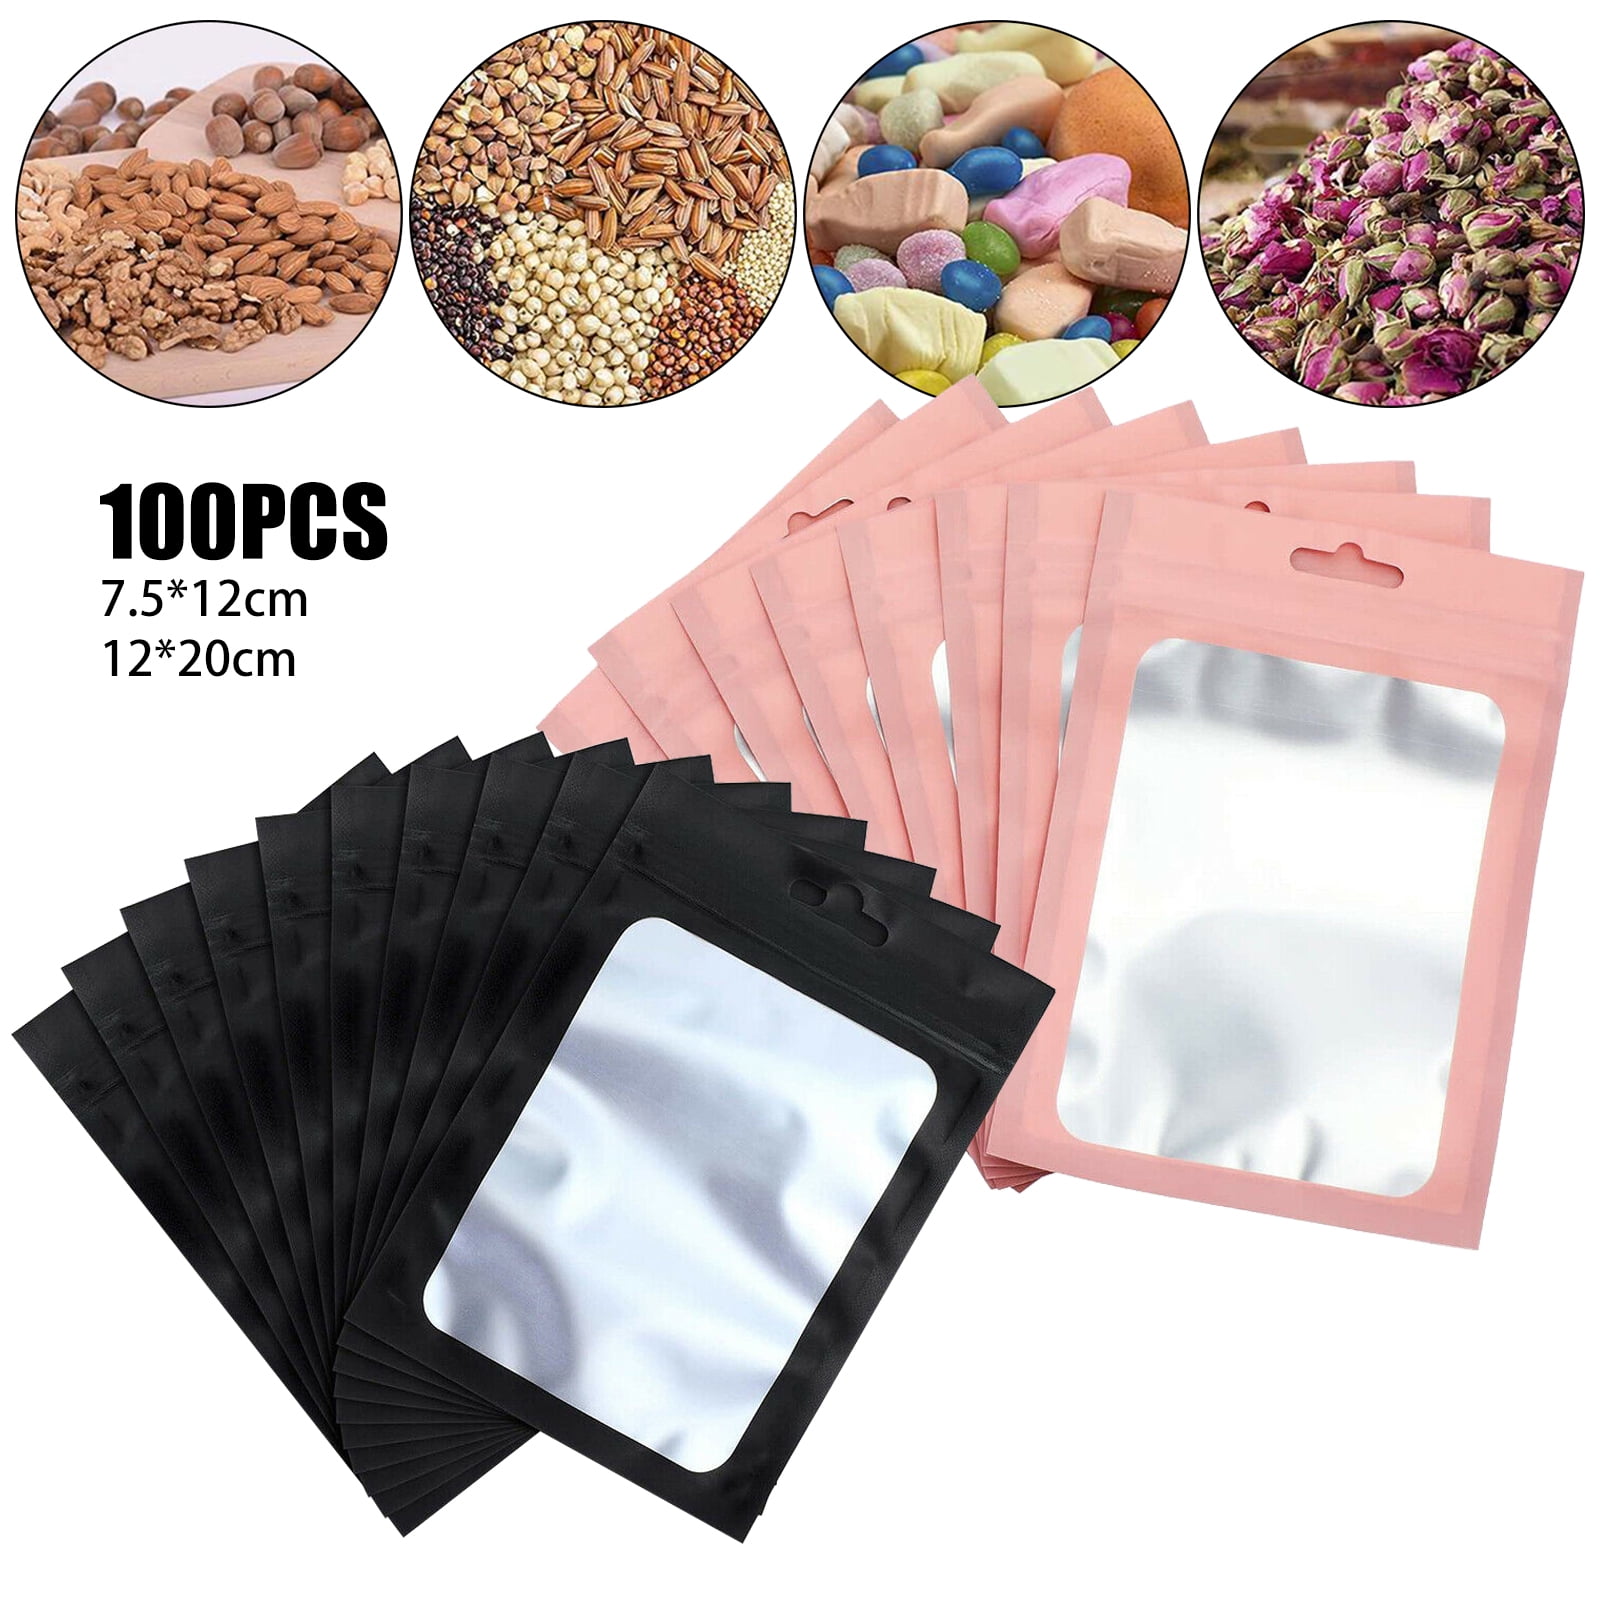 100pc Clear White Mylar Tea Nut Coffee Sample Bags About 3x5in Outer Size 